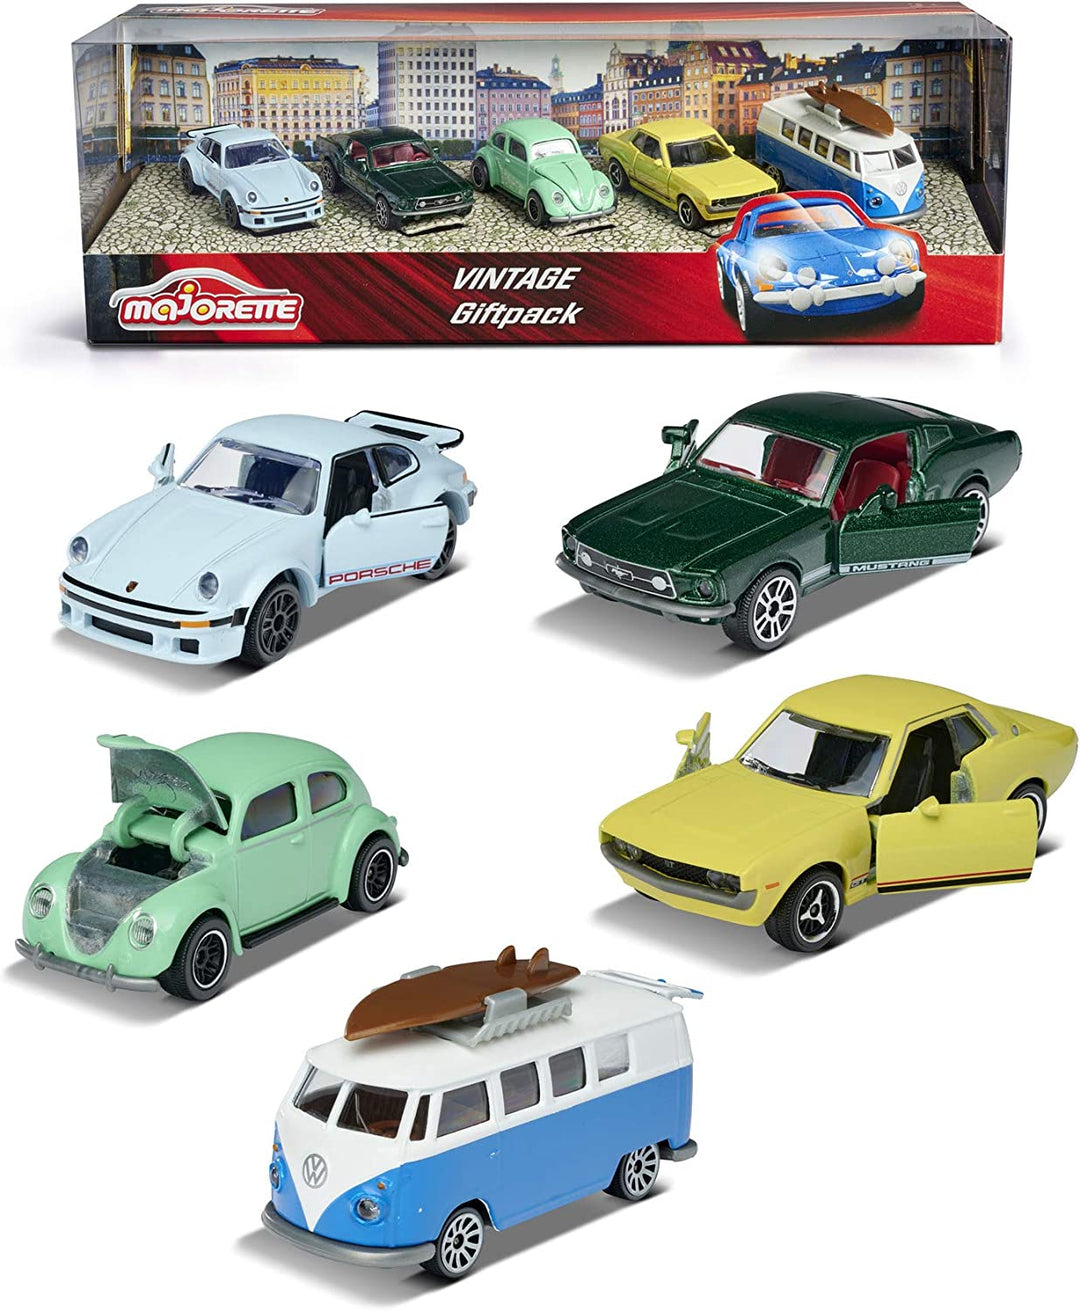 VINTAGE EDITION COLLECTOR DIE-CAST 5 CAR PACK, Assorted